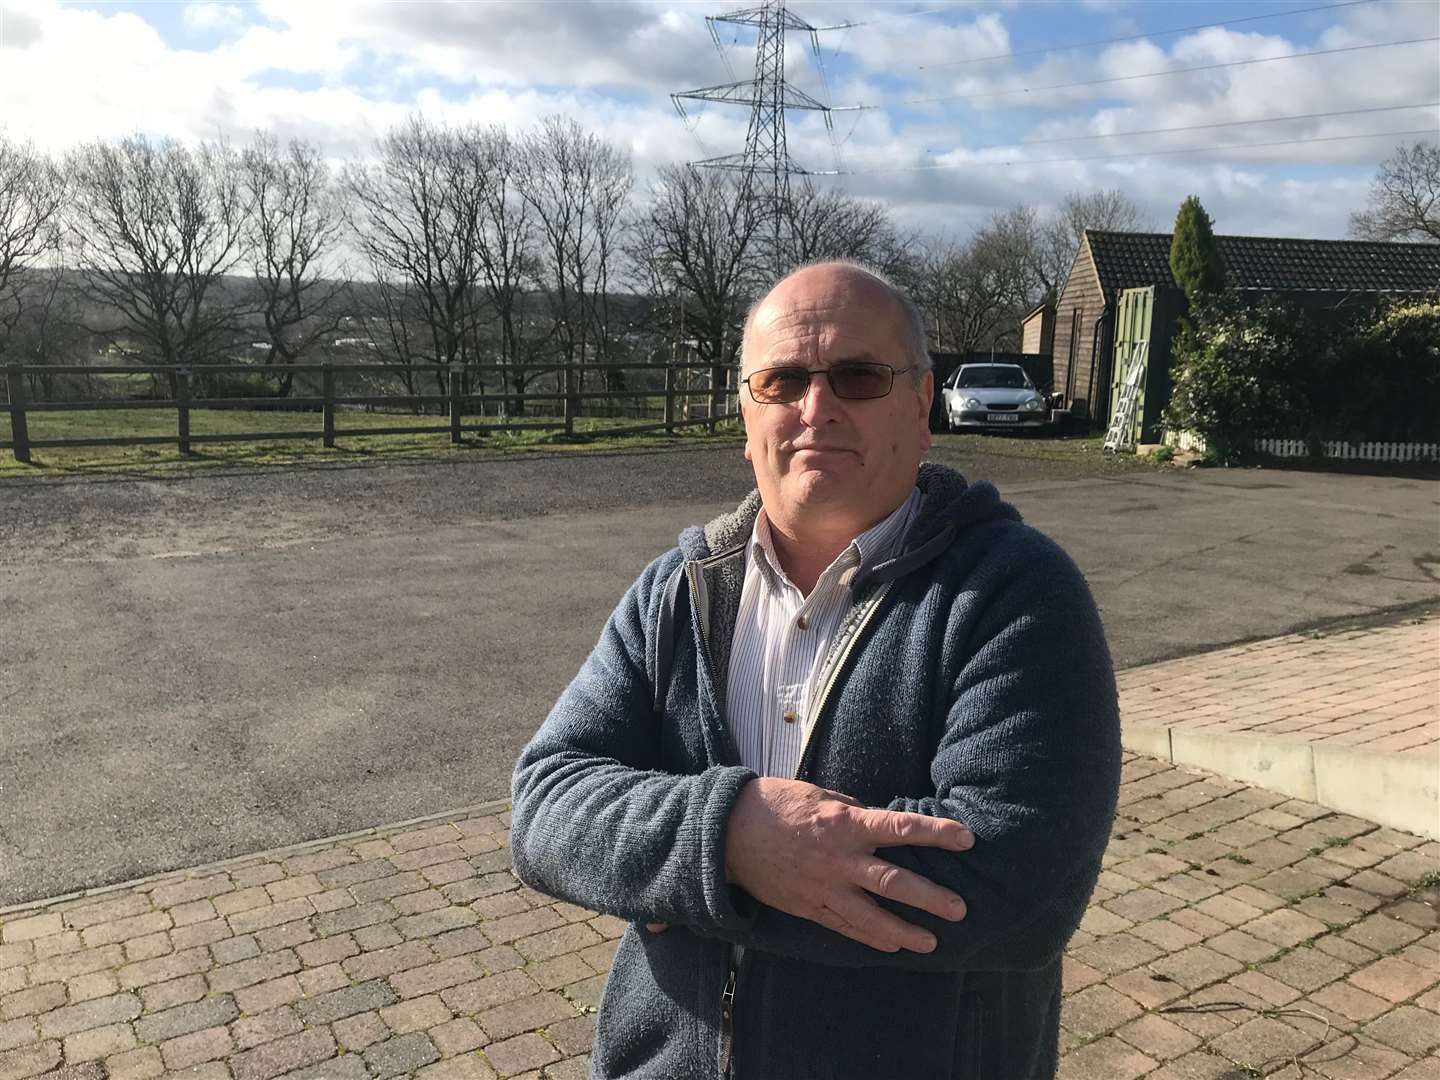 Ivor Herdson, who lives in Shalloak Road, says the site gives off a hideous smell